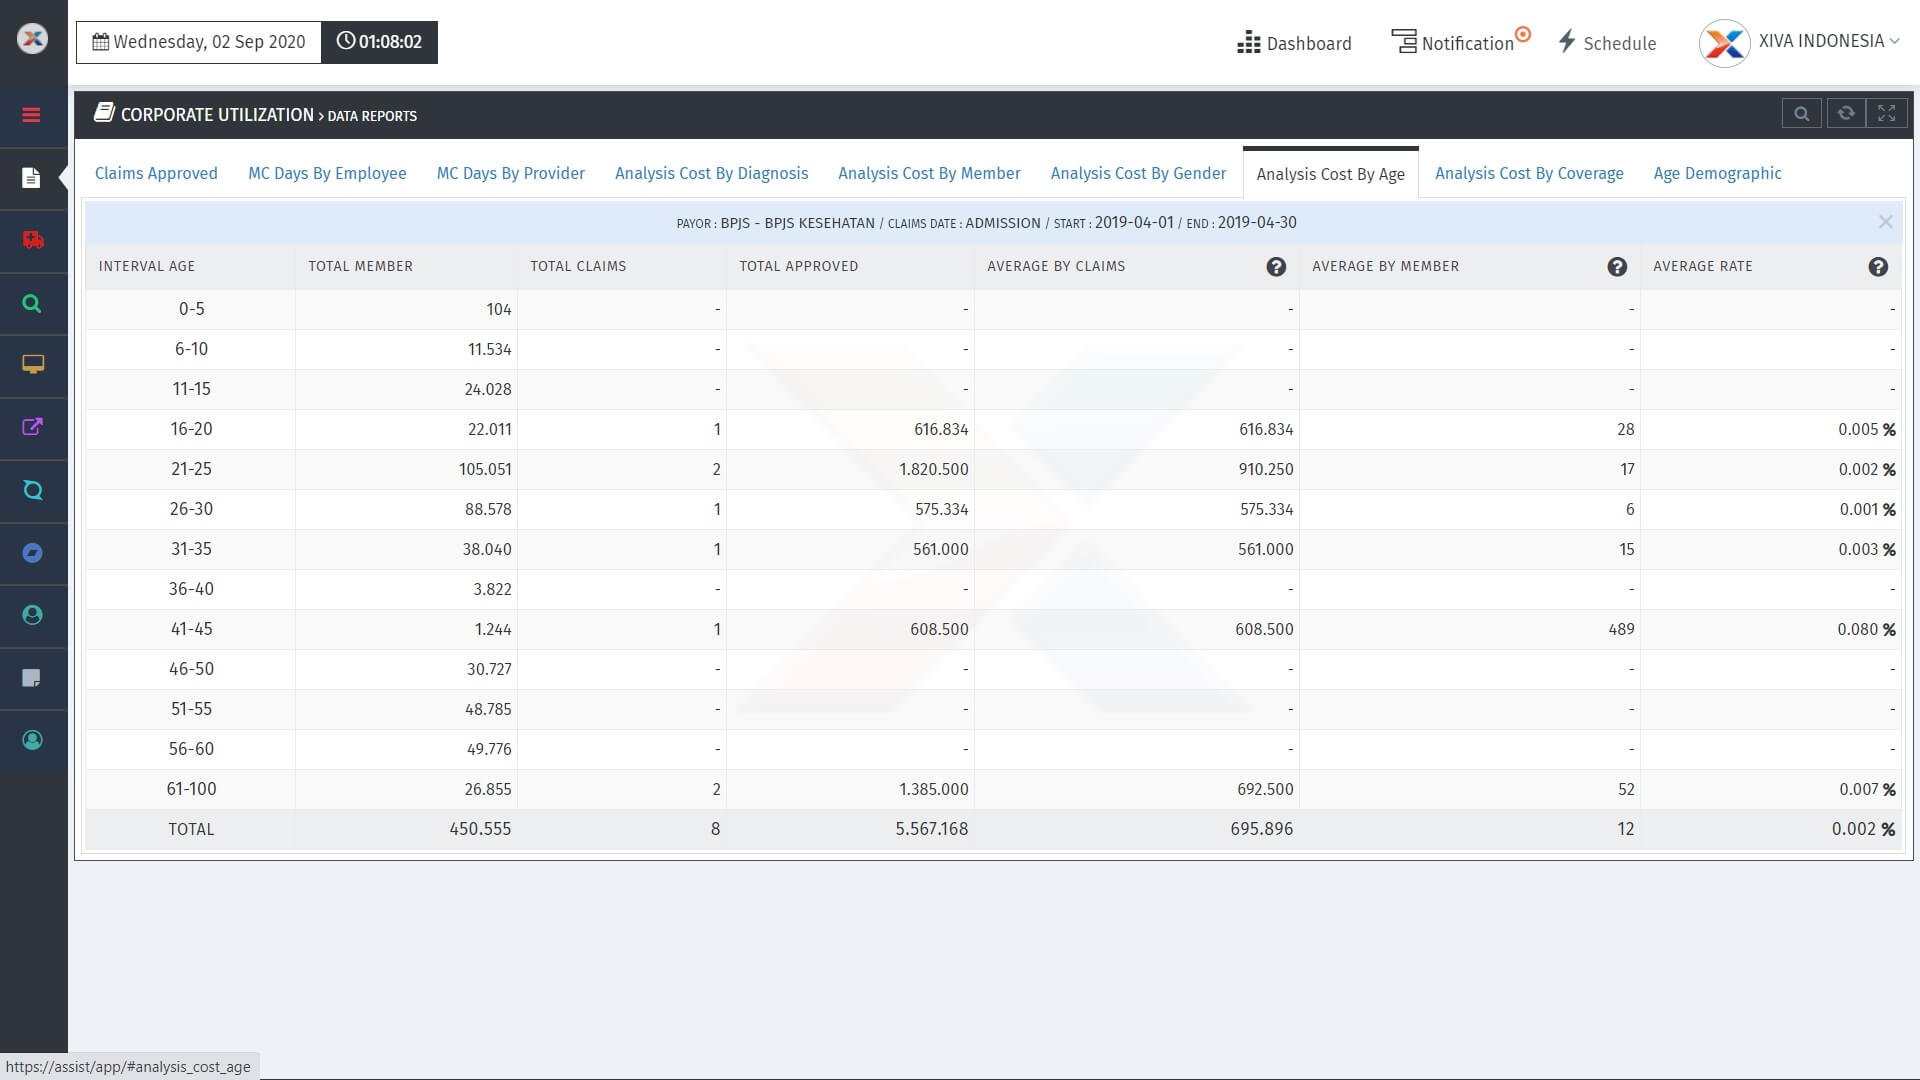 XIVA - REPORTING CORPORATE UTILIZATION LIST PREVIEW